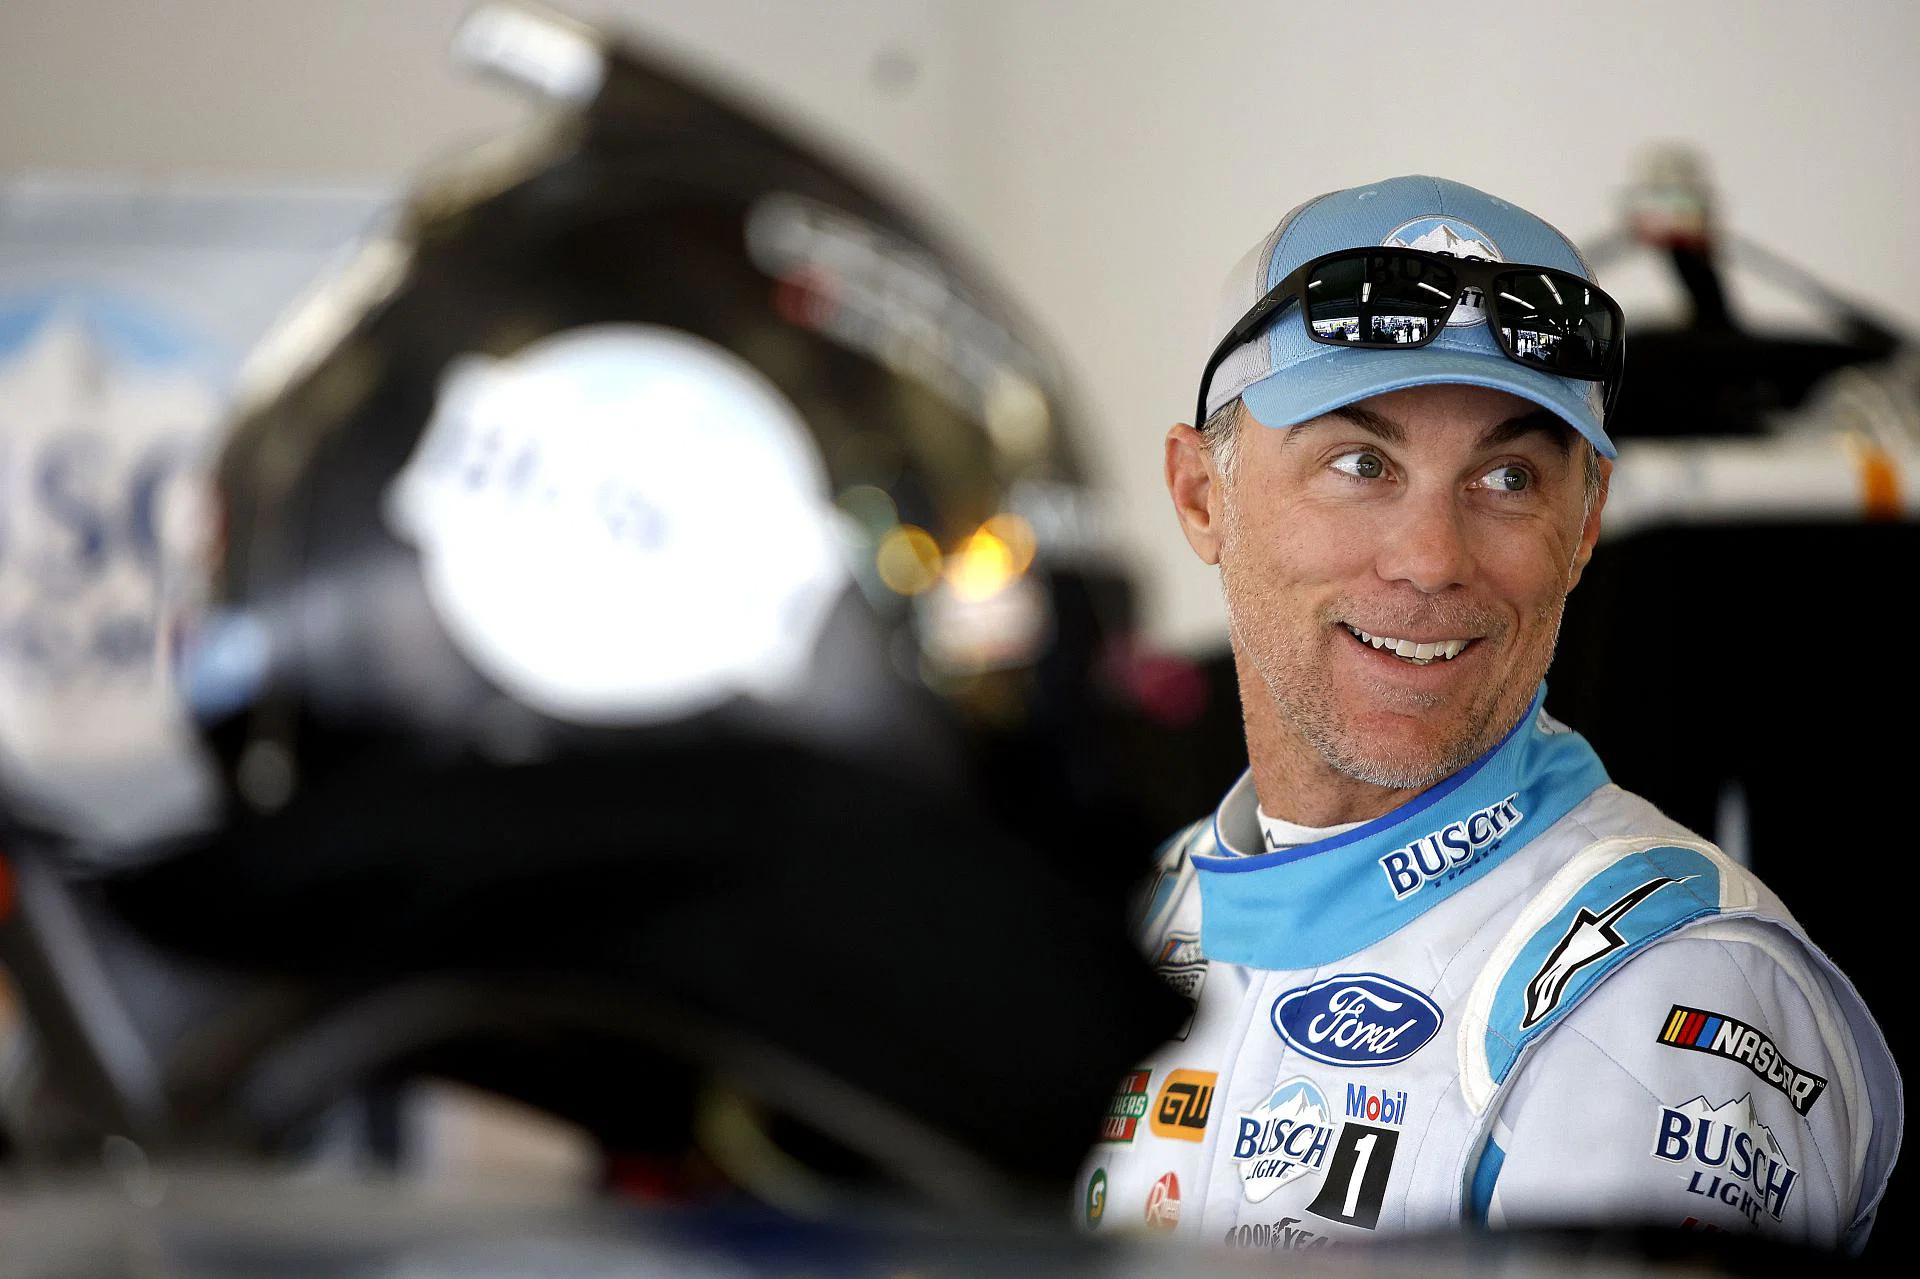 Kevin Harvick, Formula 1 excitement, Racing aspirations, Fast-paced action, 1920x1280 HD Desktop